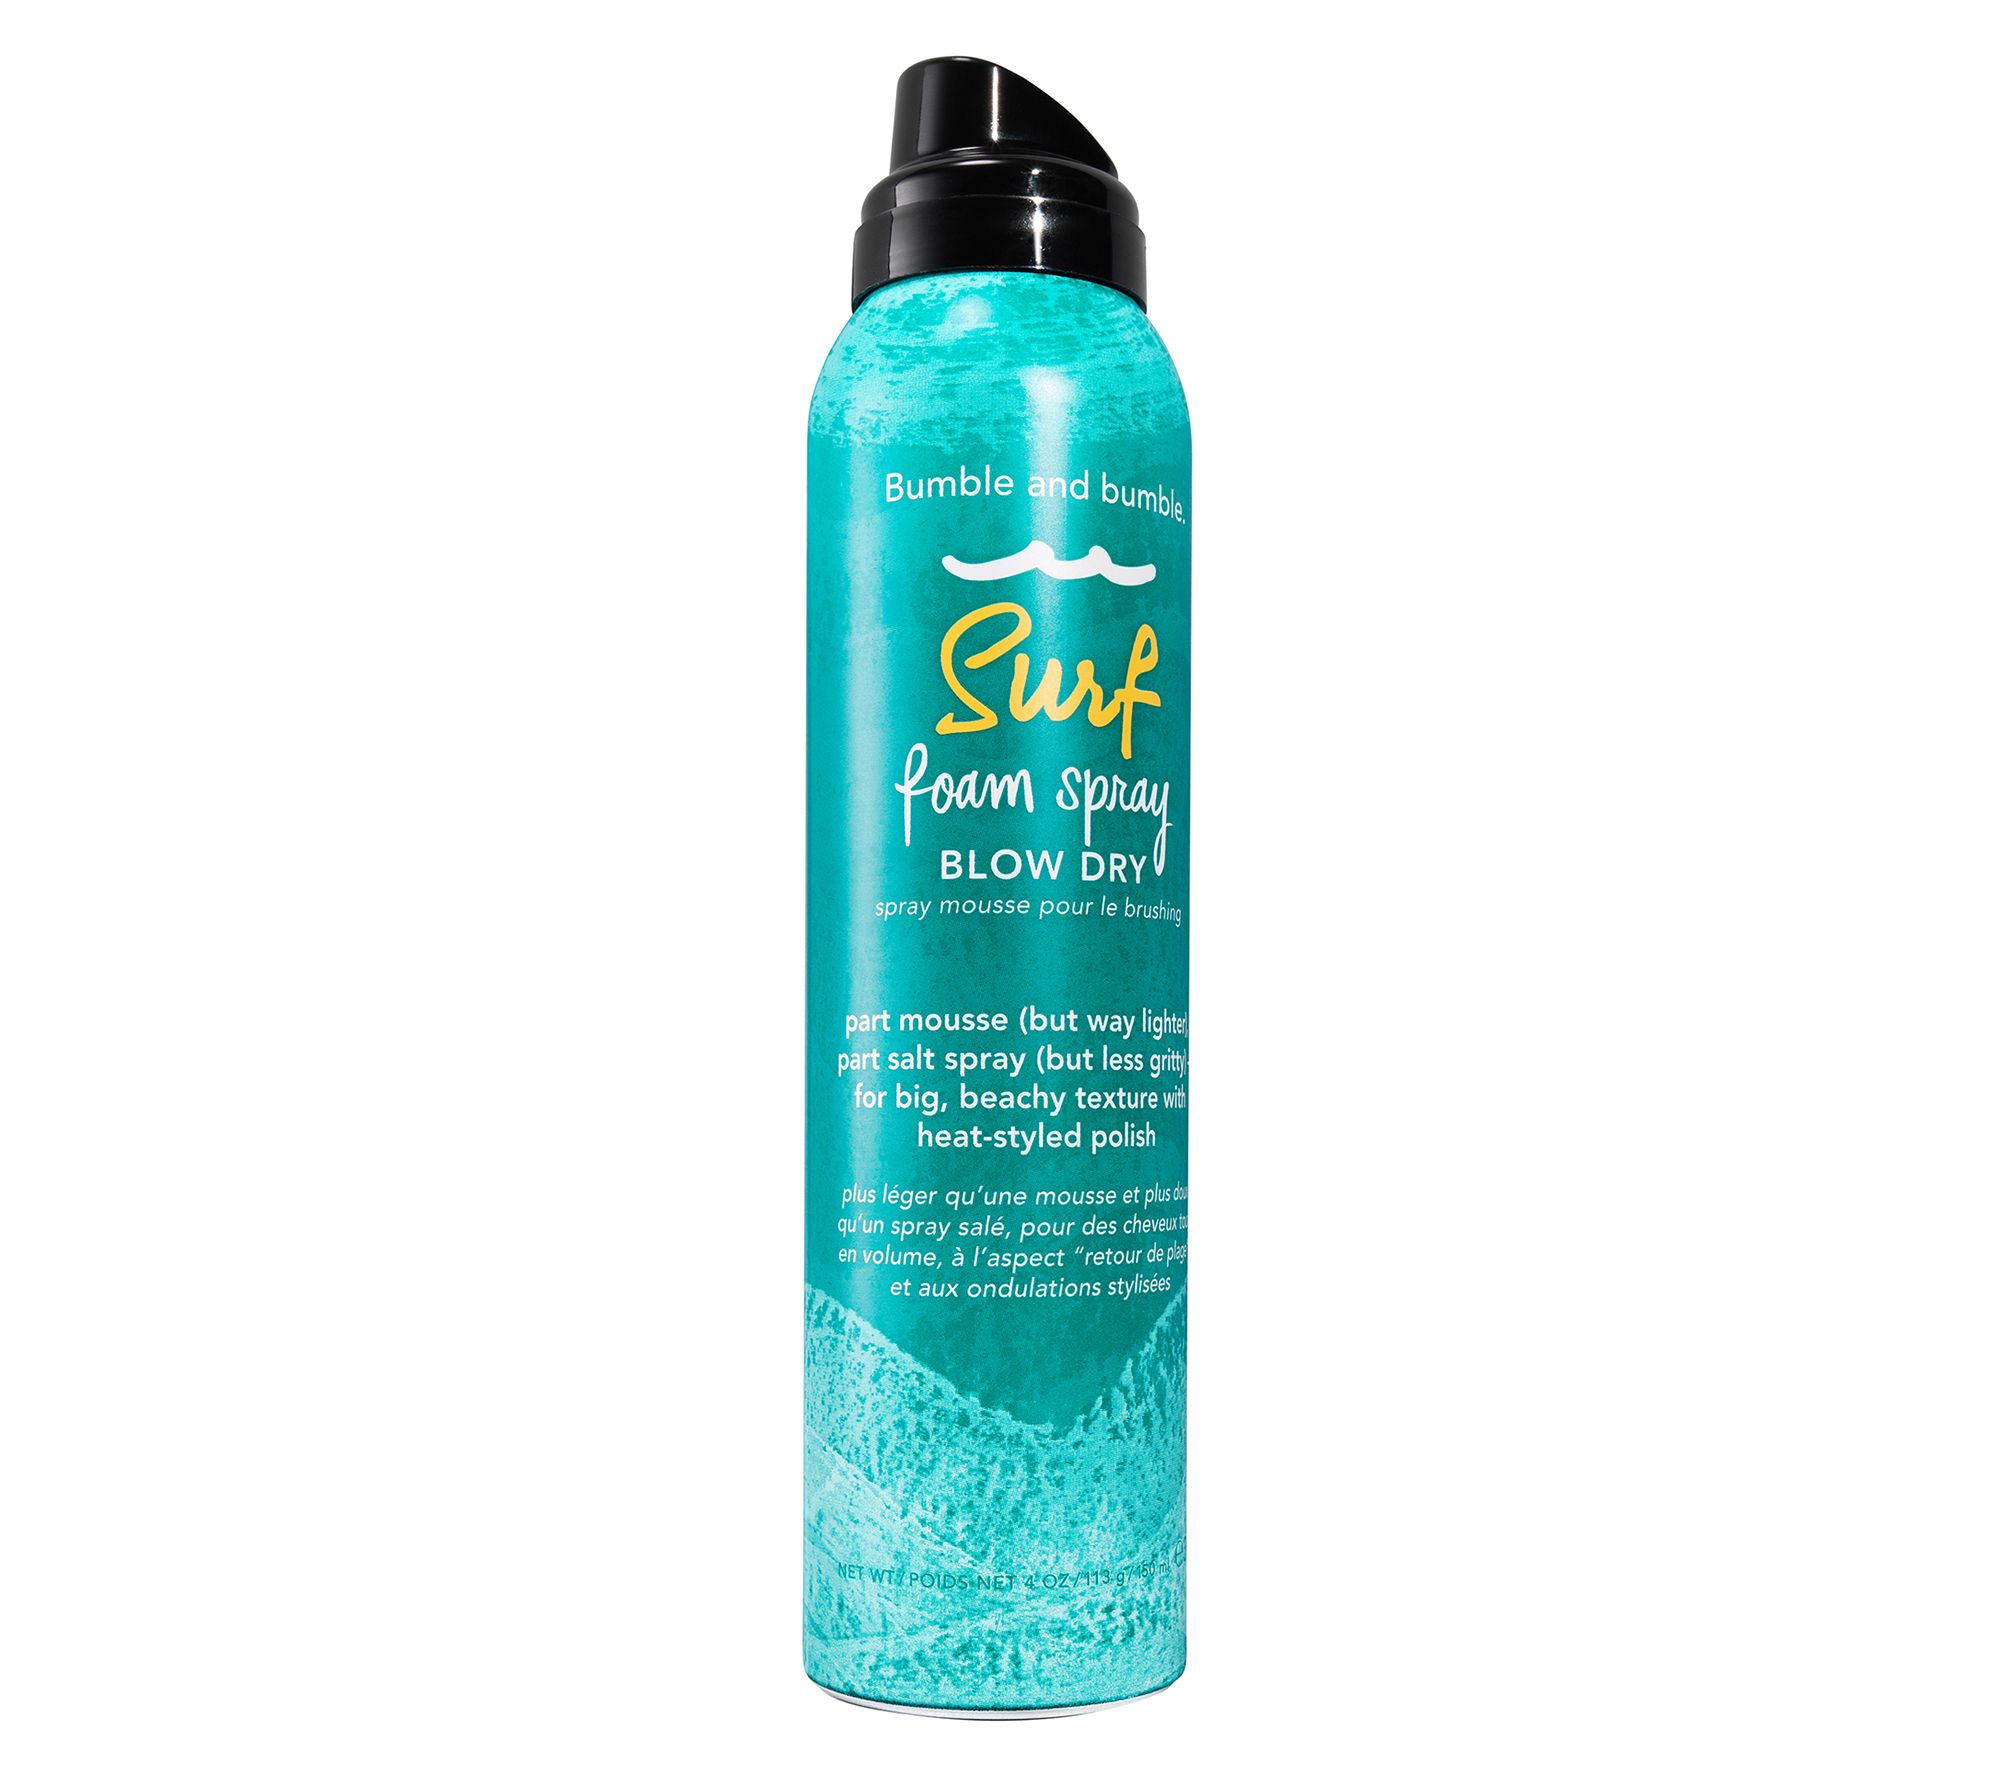 Bumble and Bumble Surf Spray - 4 oz bottle